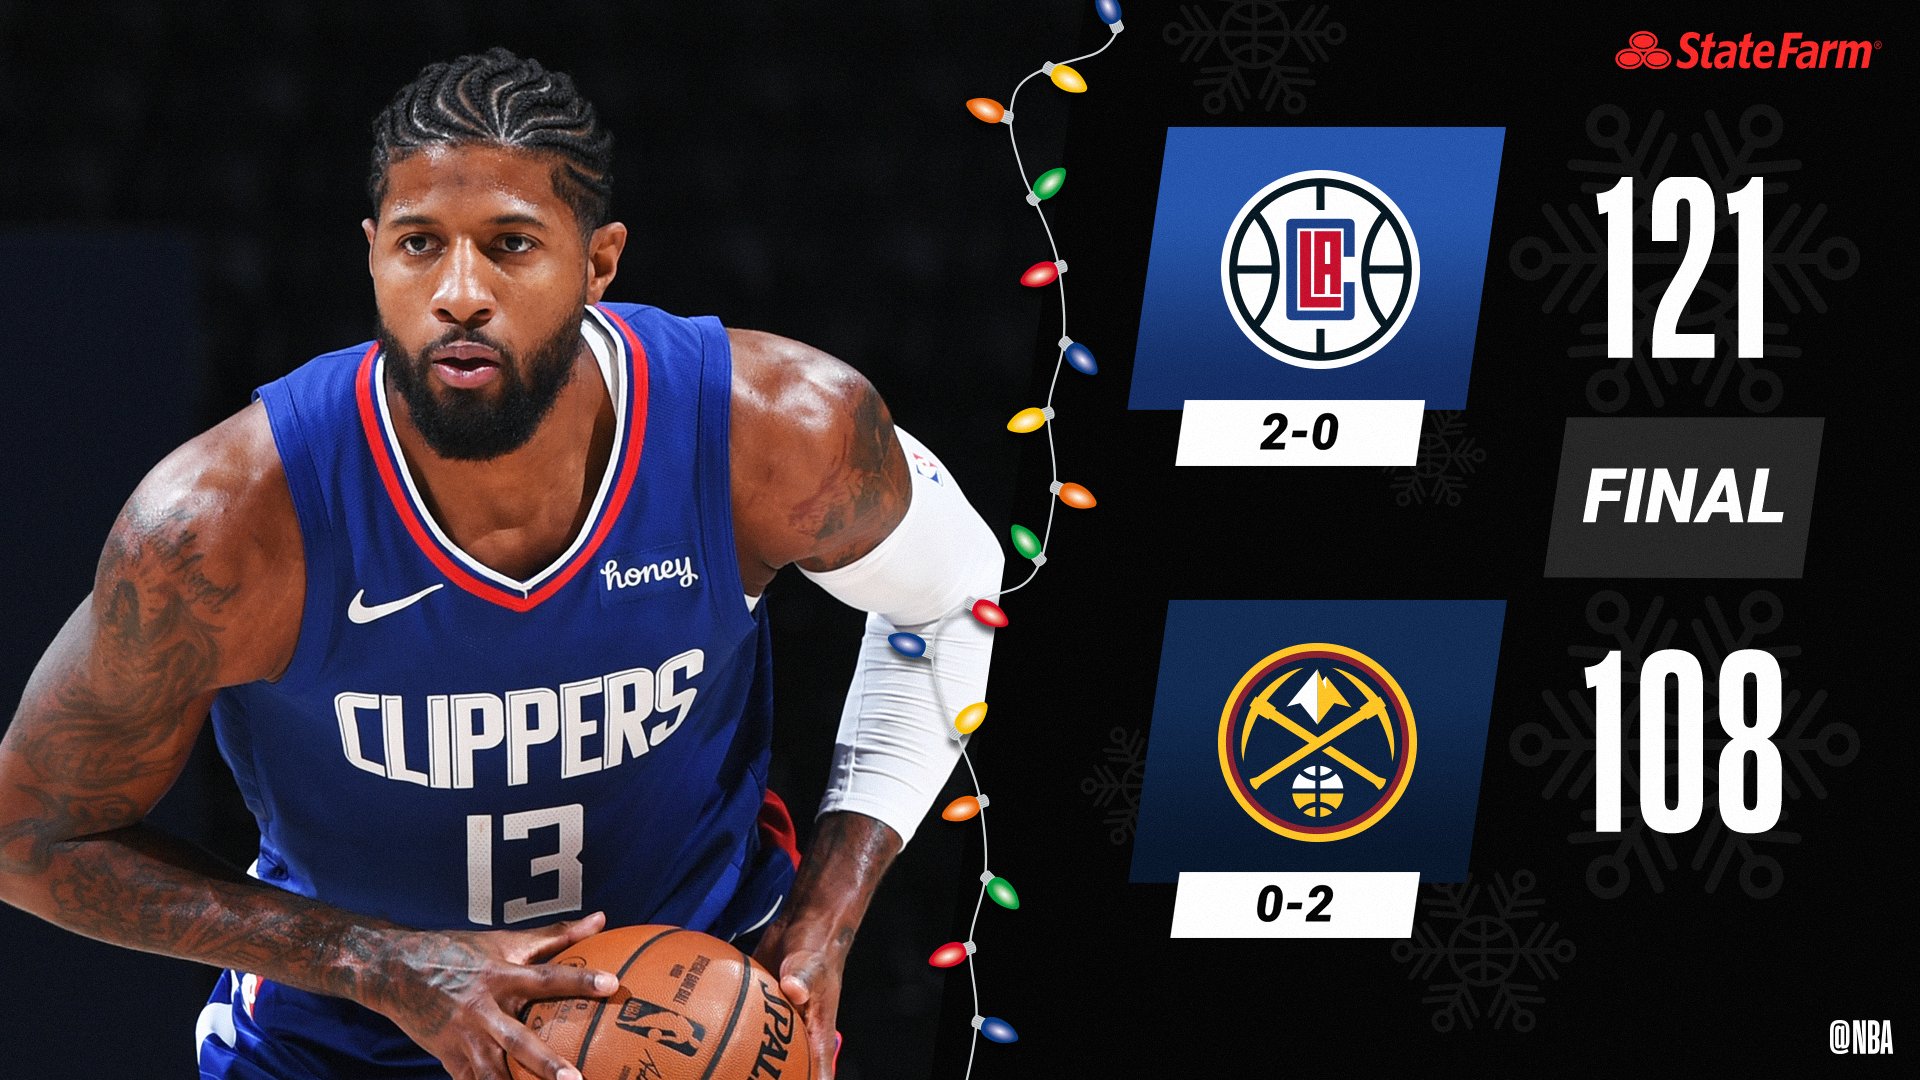 Clippers win second game in a row